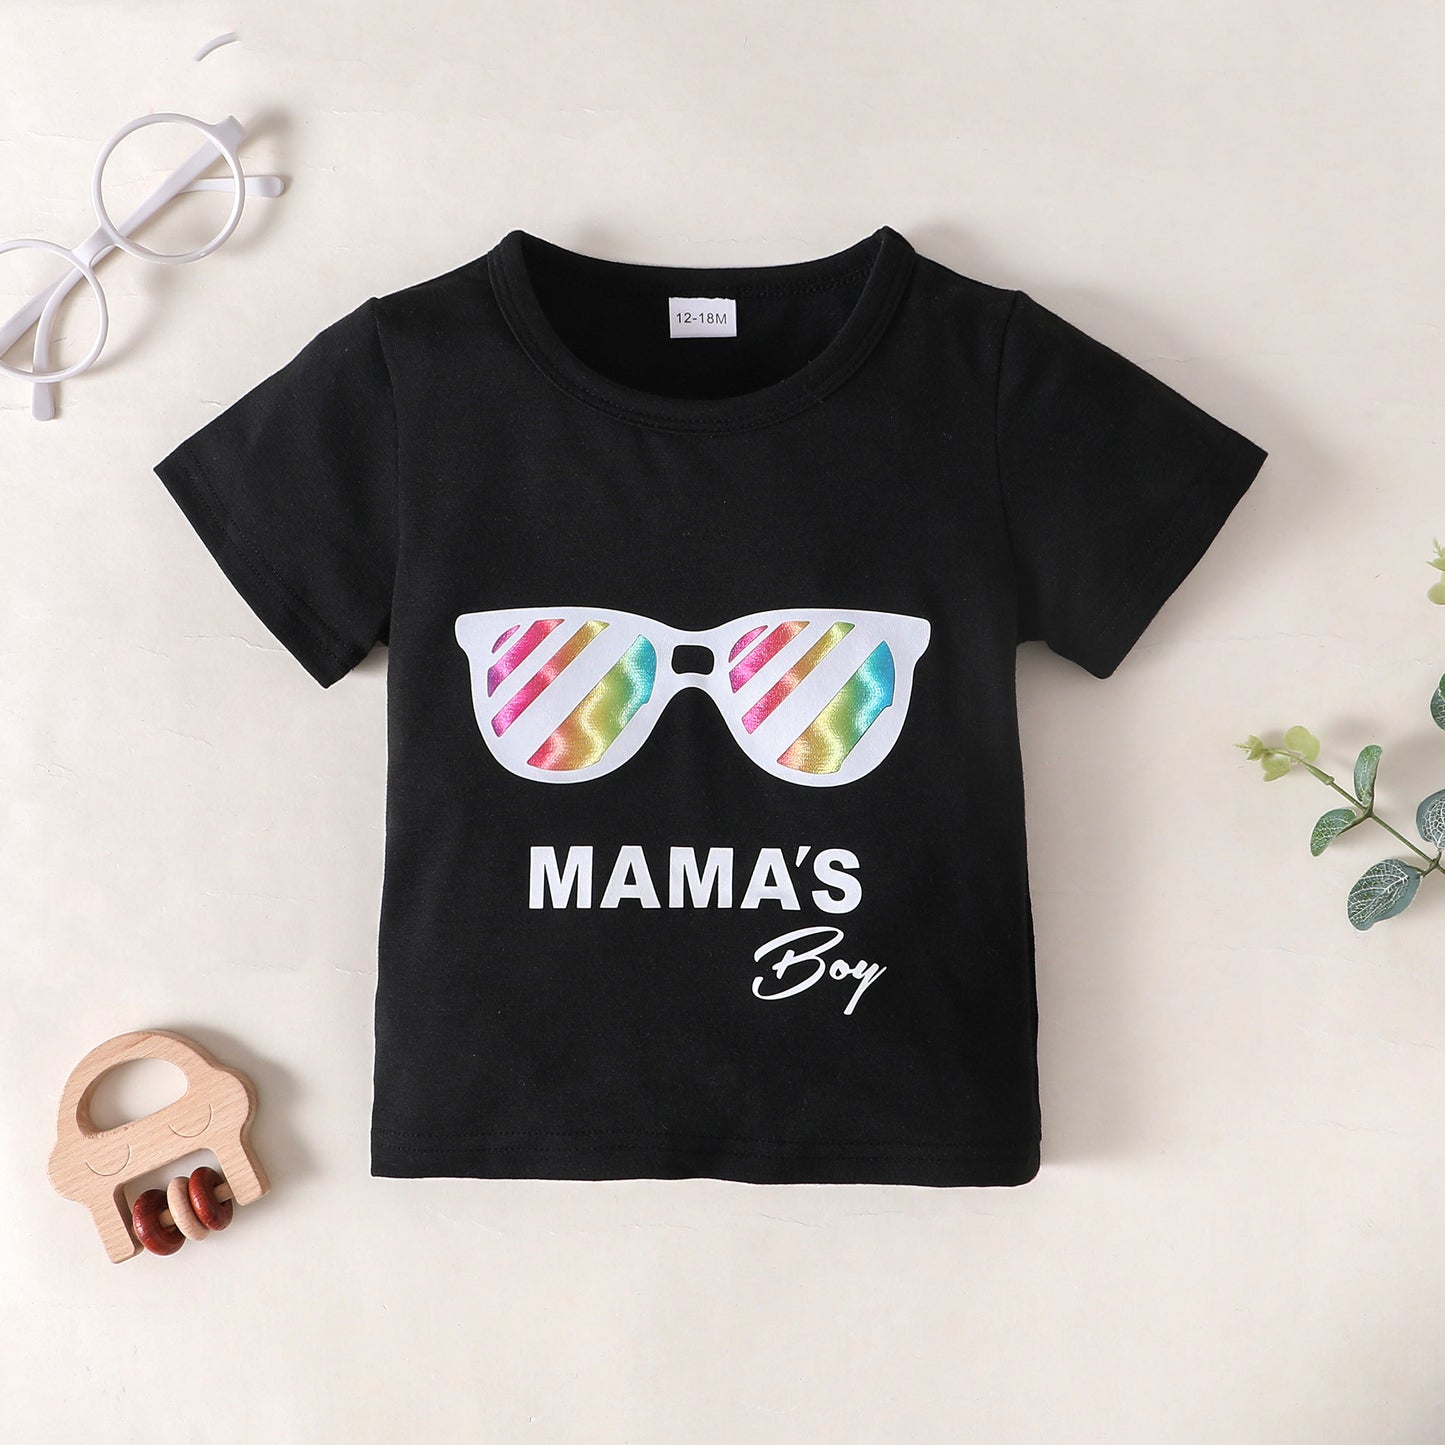 MAMA'S BOY Graphic T-Shirt and Camouflage Shorts Set - DromedarShop.com Online Boutique